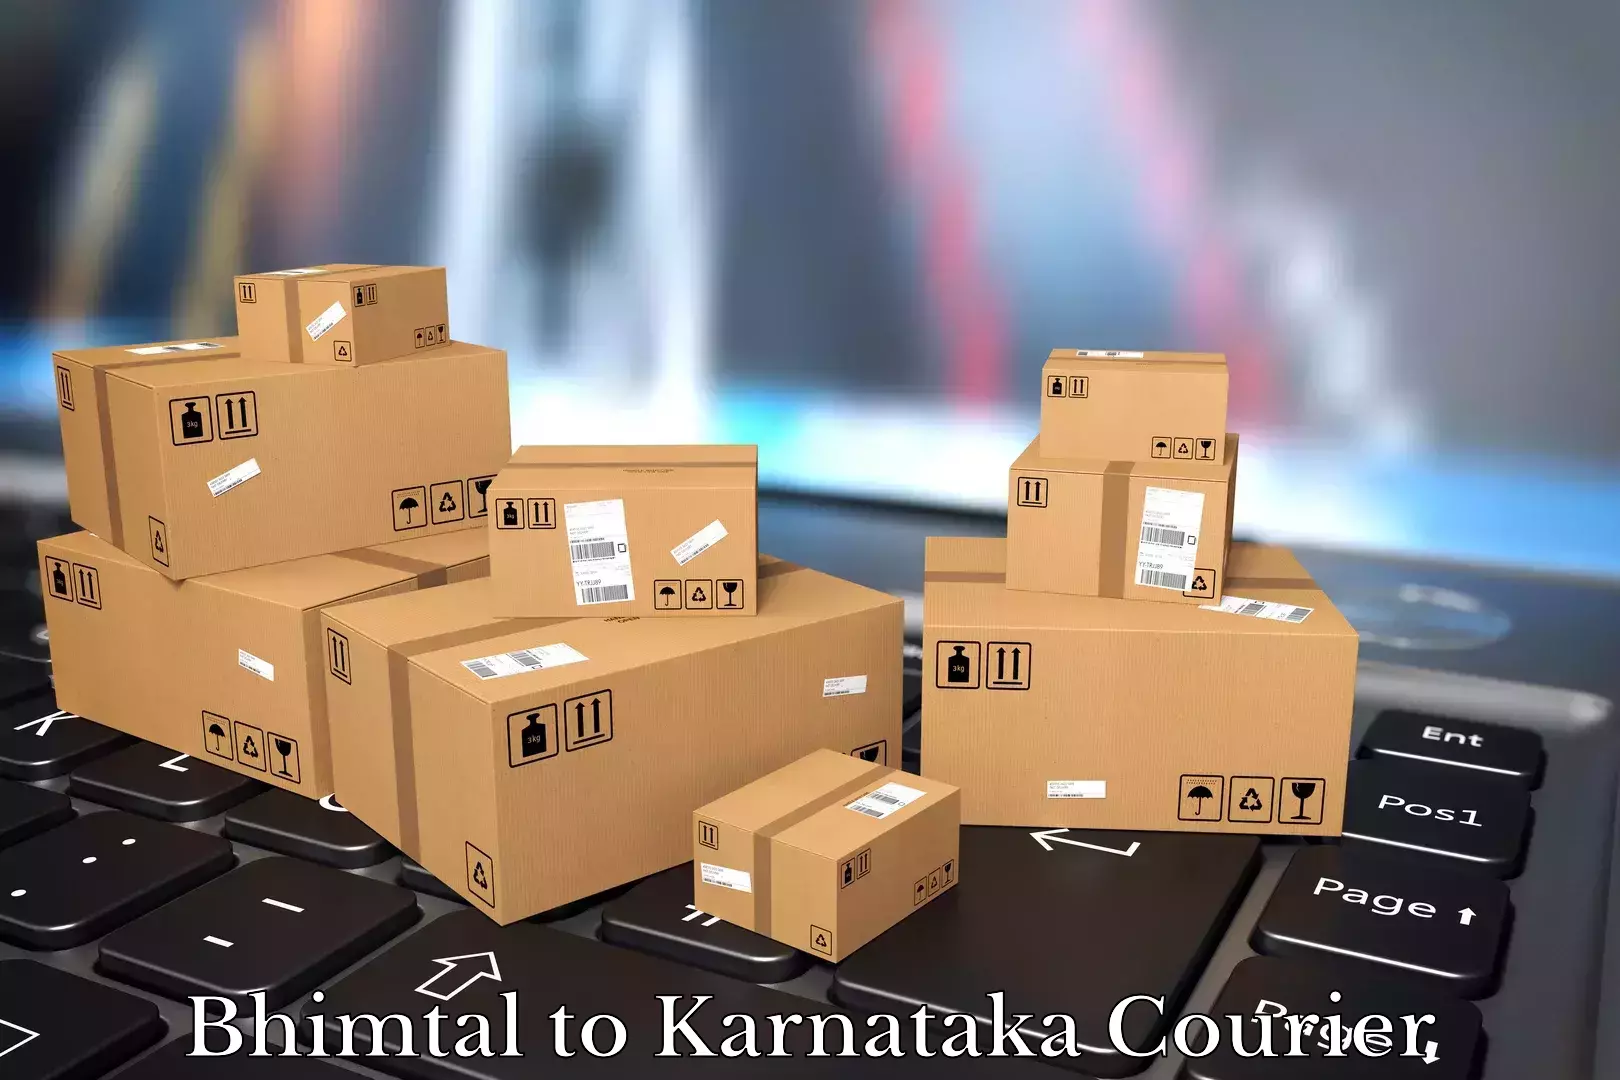 Furniture moving specialists Bhimtal to Gurmatkal